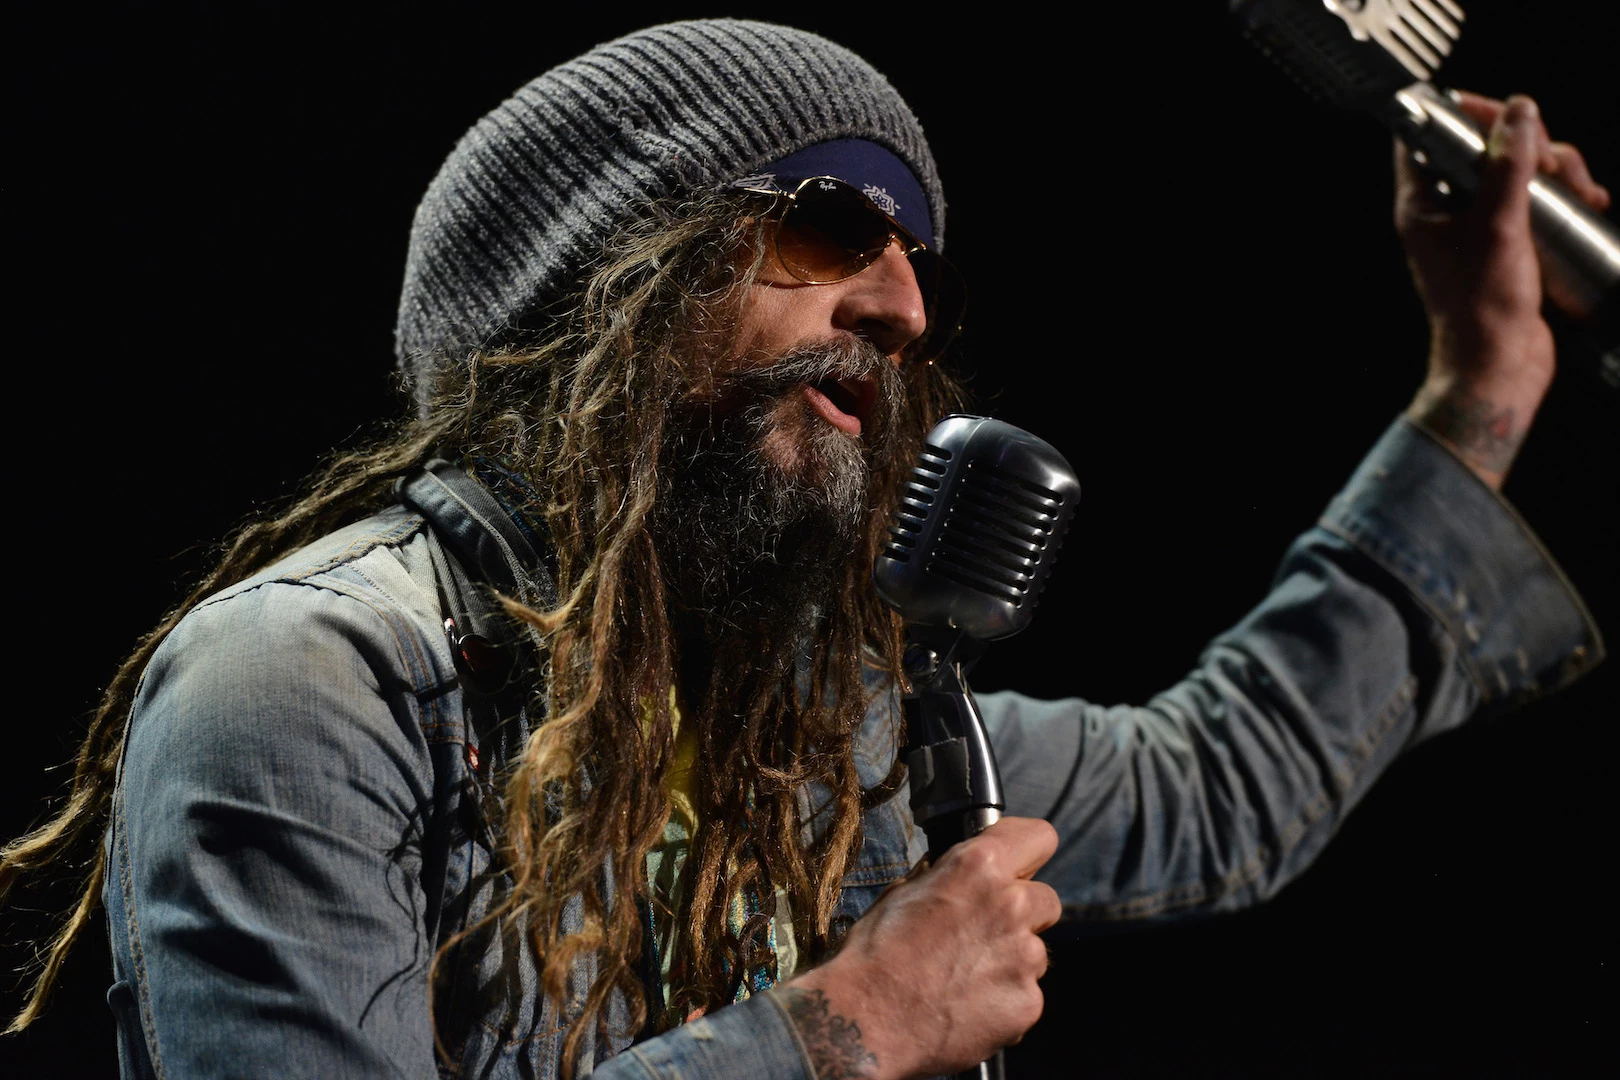 Rob Zombie Porn - Rob Zombie: Mainstream Shuns Metal Almost as Much as Porn